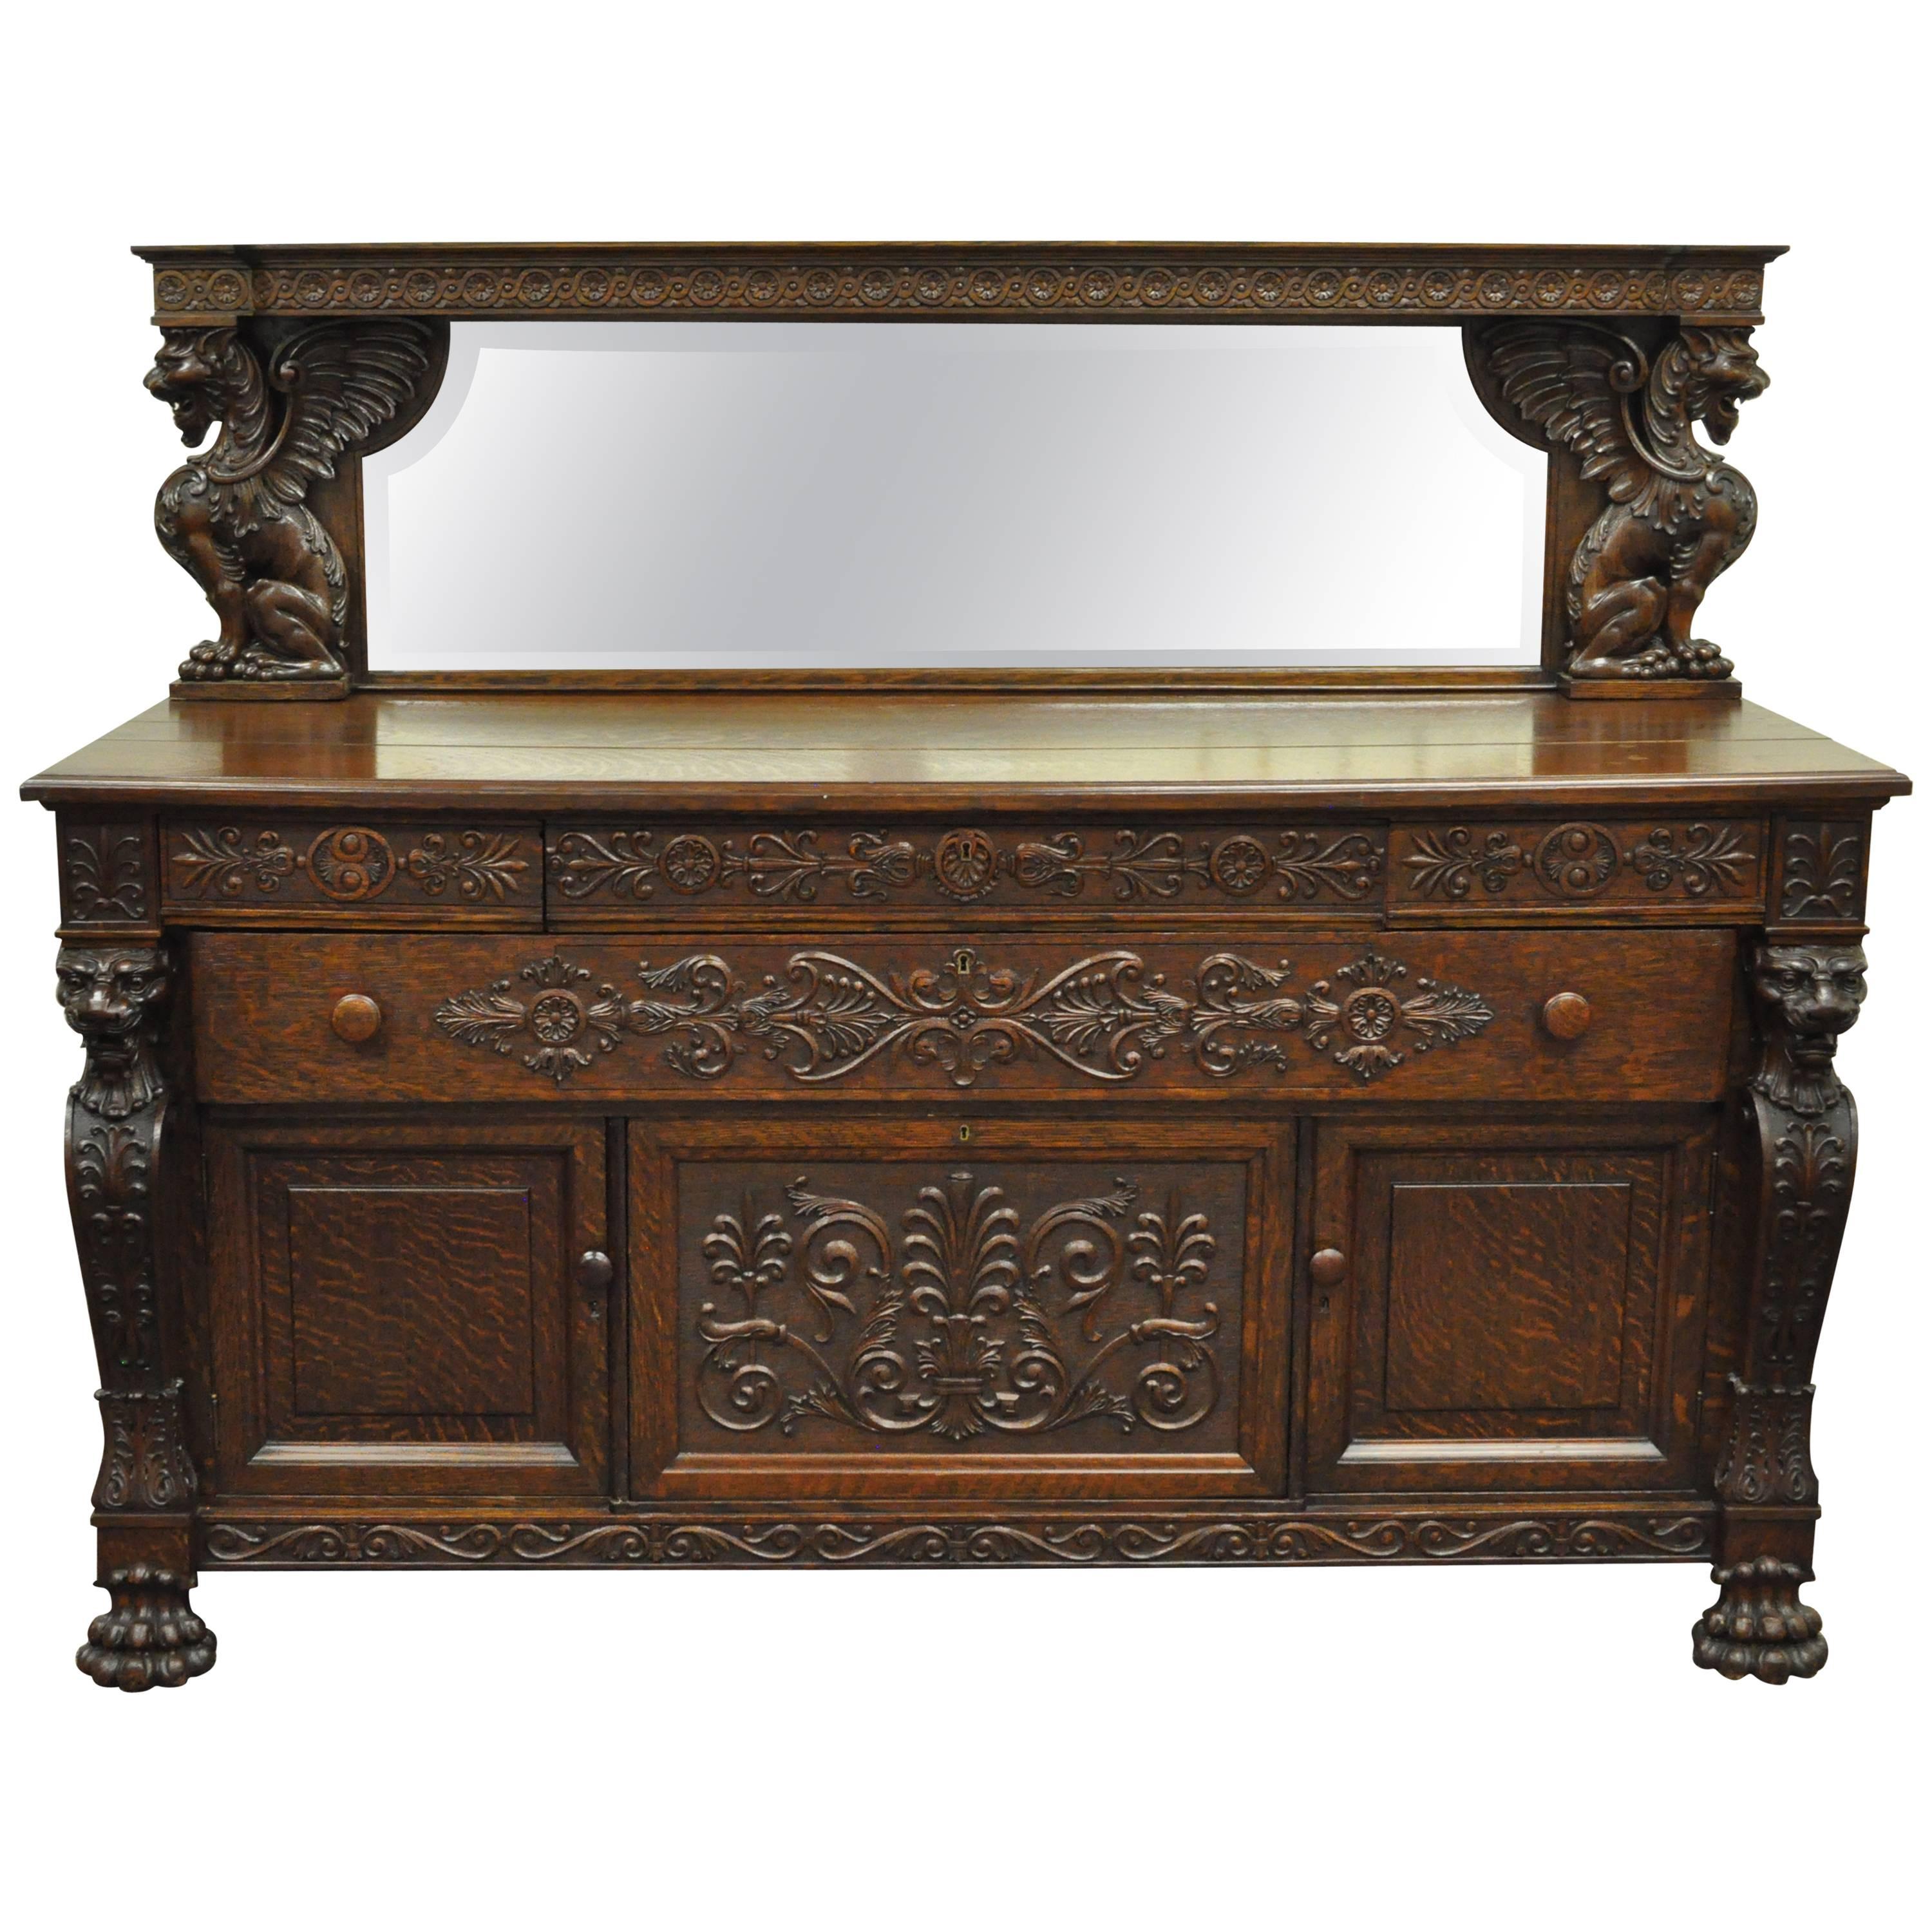 Victorian Oak Buffet Sideboard and Mirror with Lions and Griffins attr. Horner